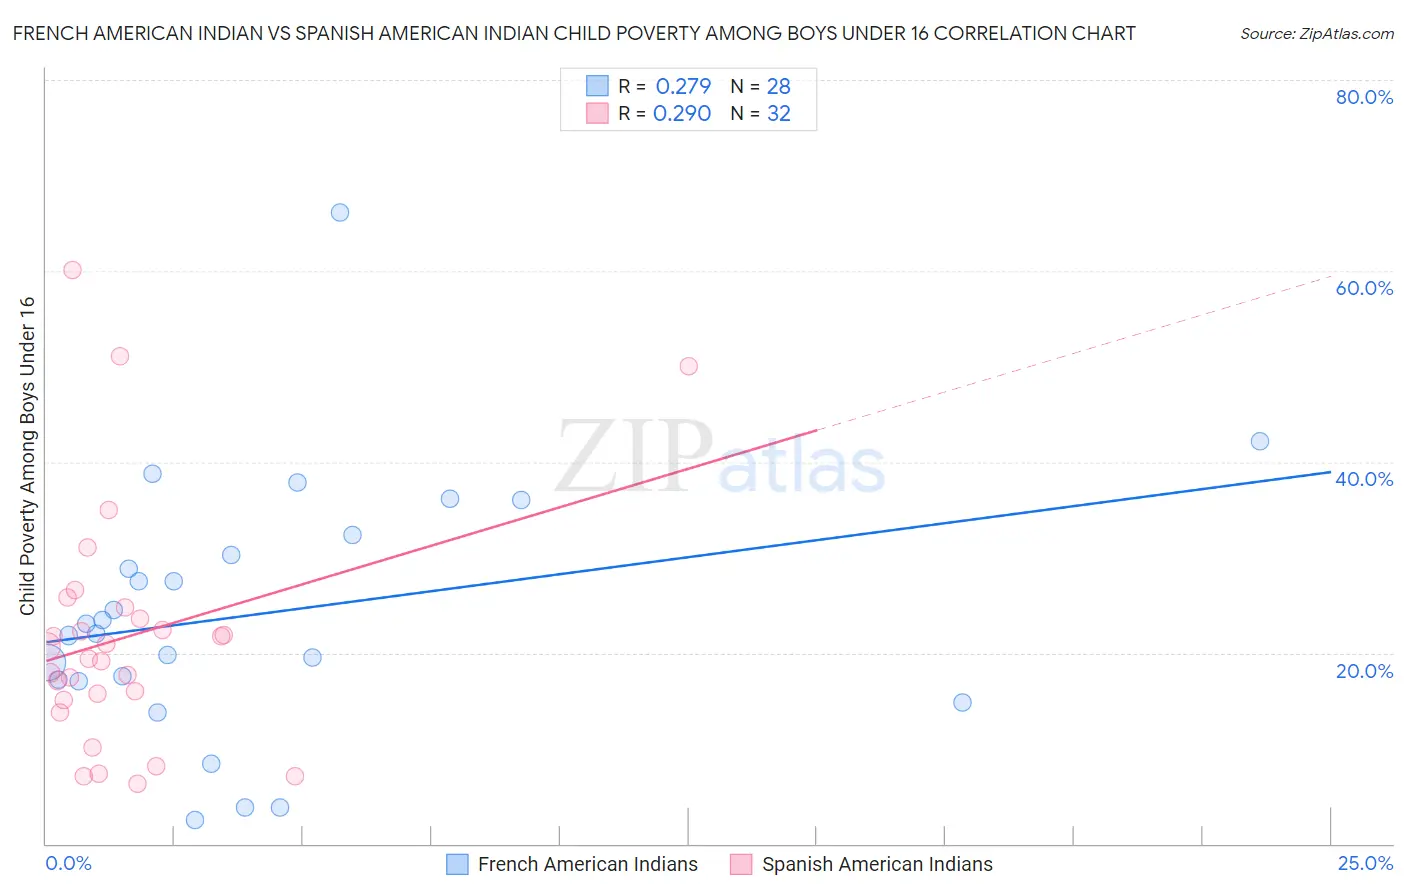 French American Indian vs Spanish American Indian Child Poverty Among Boys Under 16